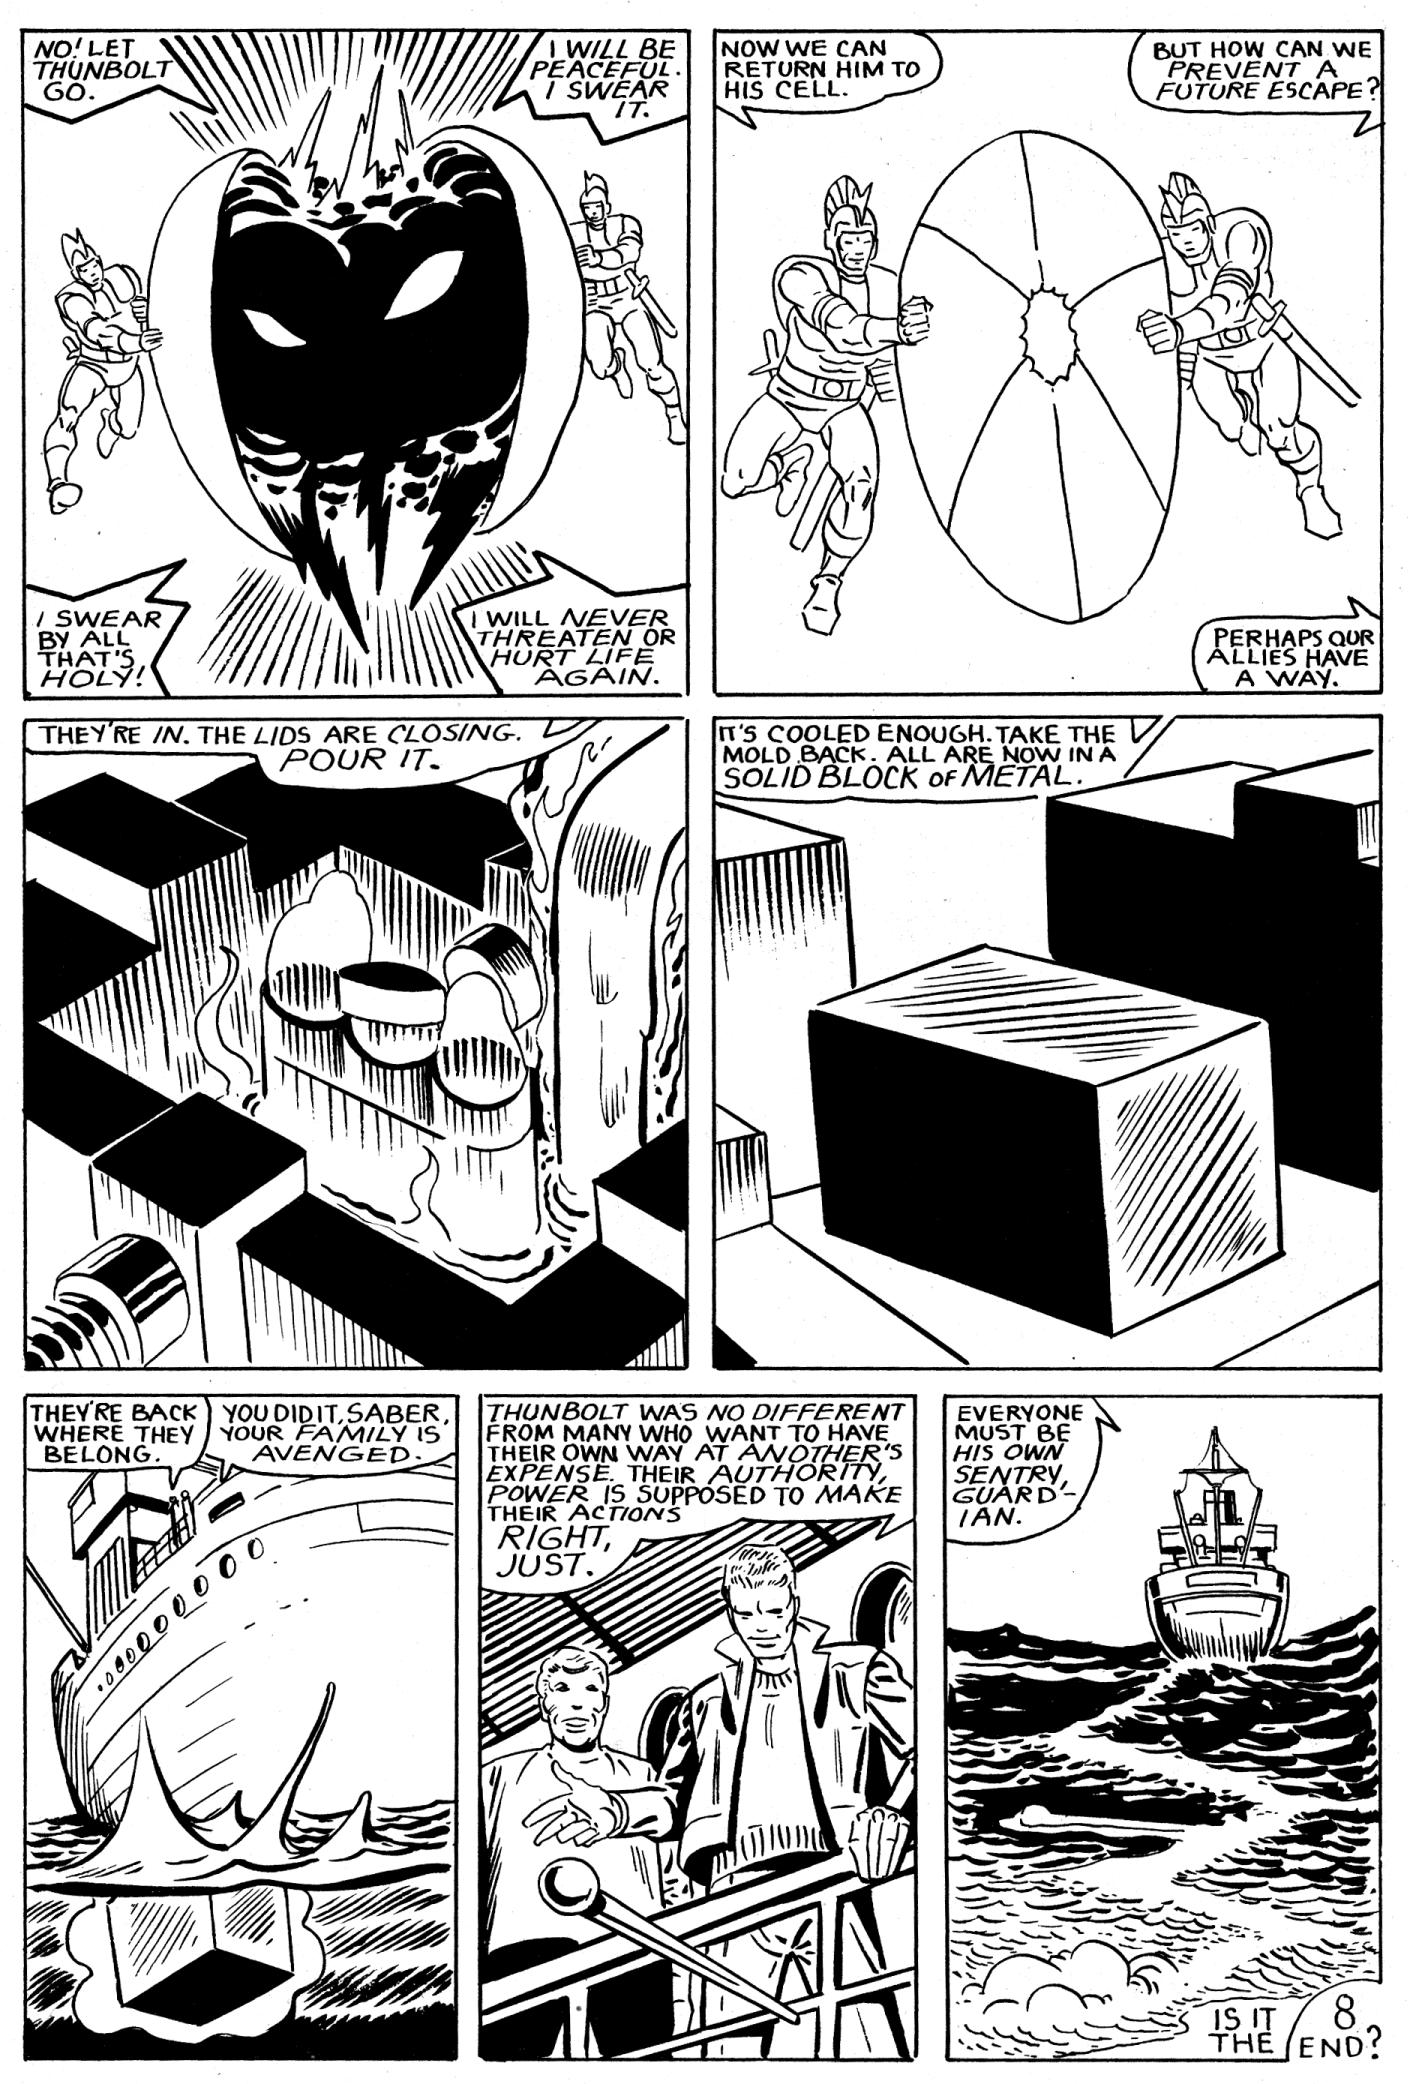 Read online Ditko's World featuring Static comic -  Issue #2 - 24